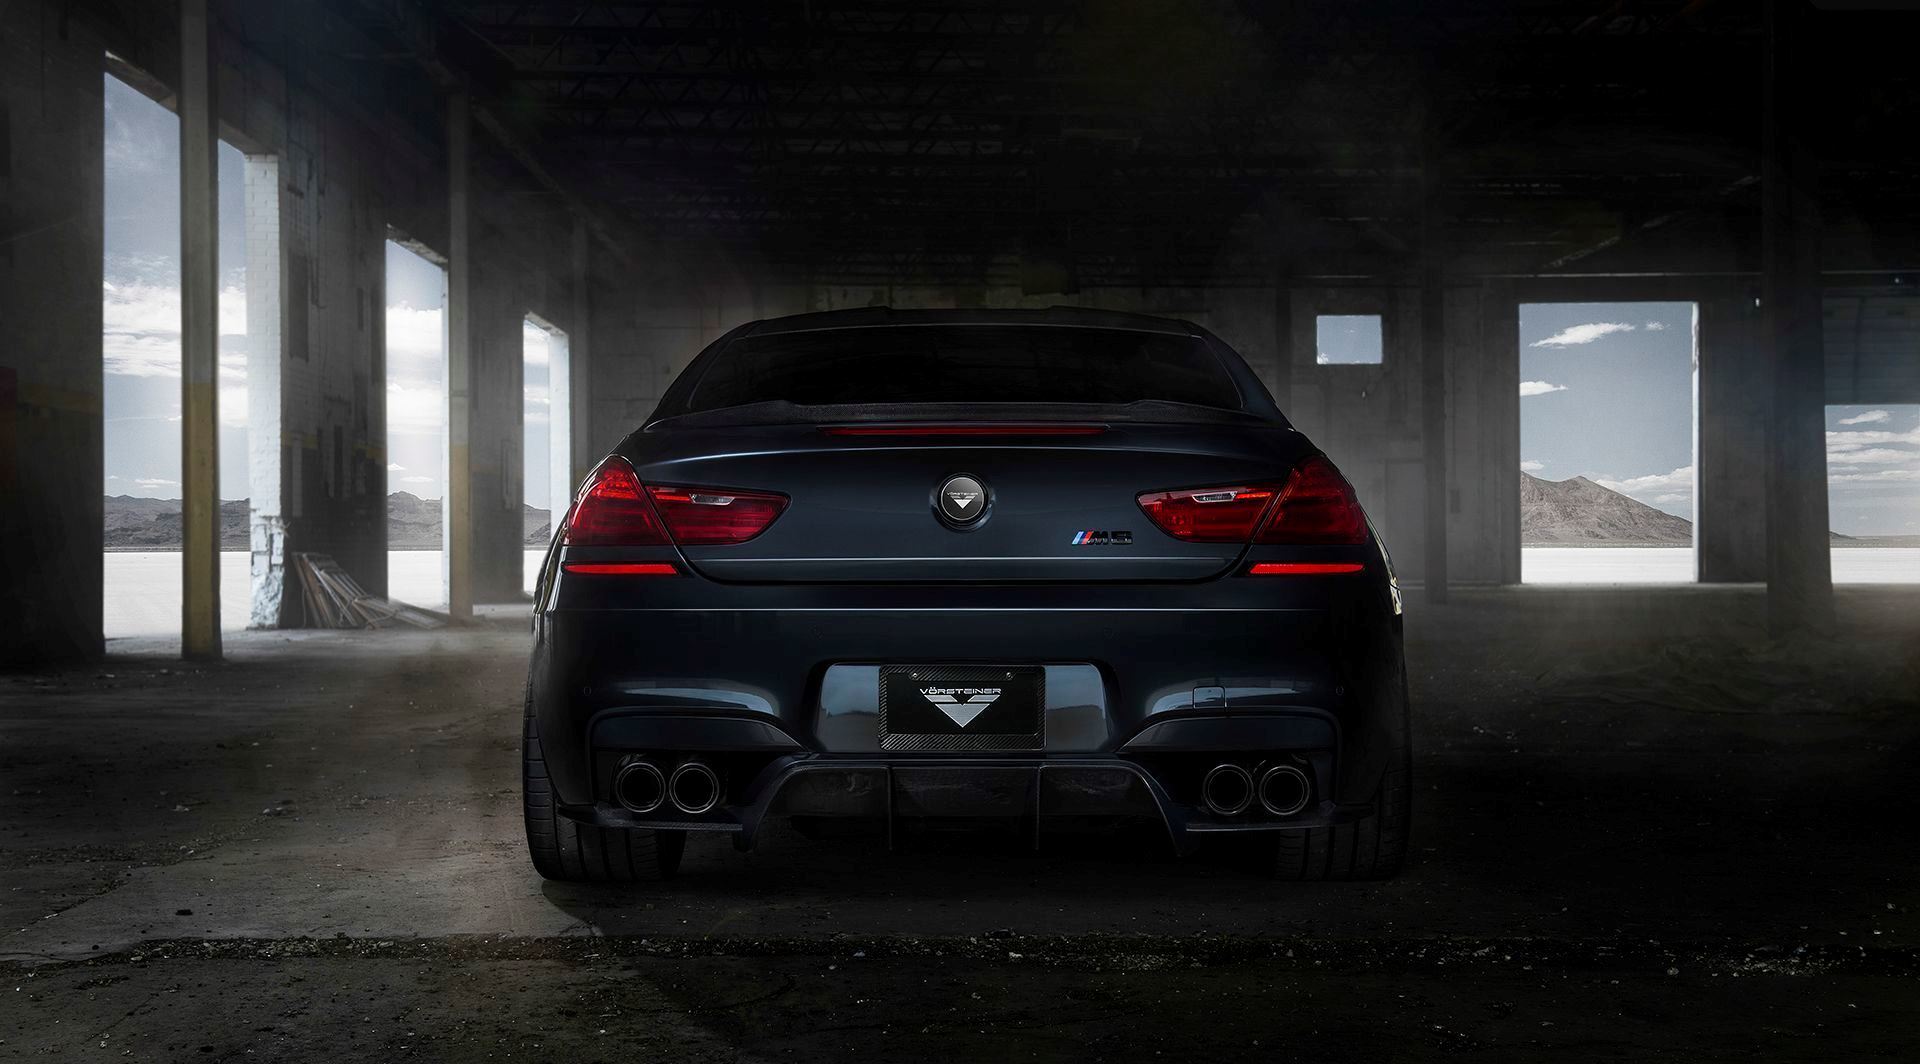 VORSTEINER STYLE CARBON rear diffuser rear bumper FOR BMW M6 NEW STYLE